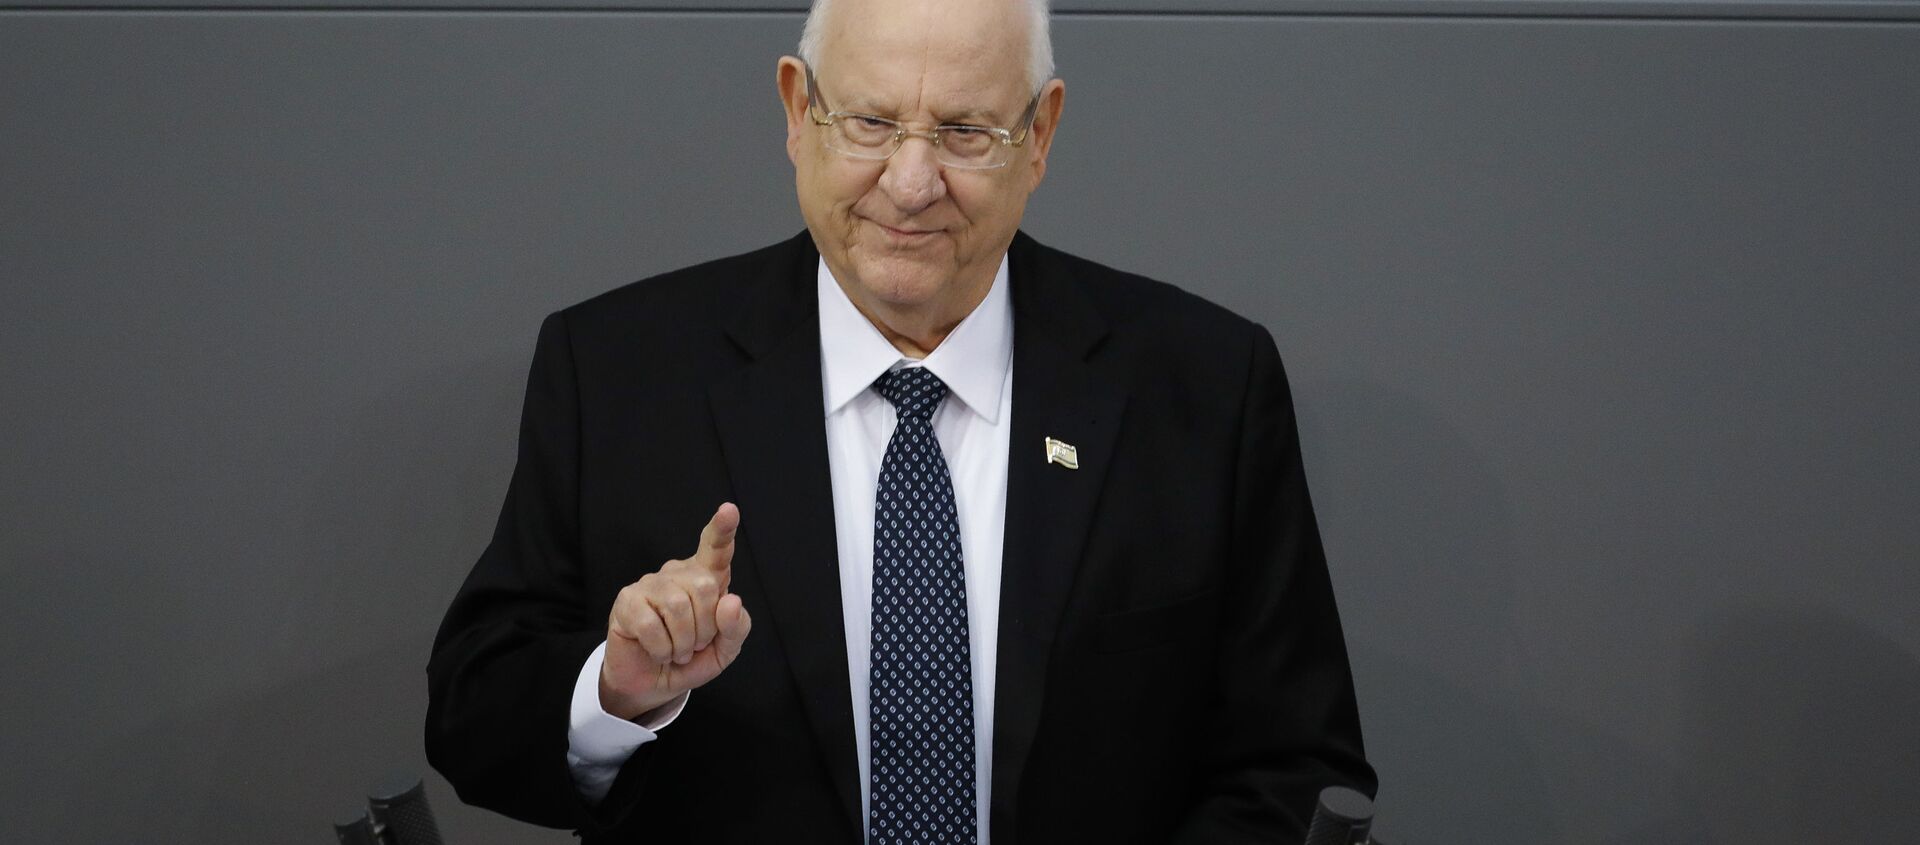 FILE - In this Jan. 29, 2020 file photo, Israel's President Reuven Rivlin delivers a speech during a special meeting of the German Parliament Bundestag commemorating the victims of the Holocaust, in Berlin, Germany - Sputnik International, 1920